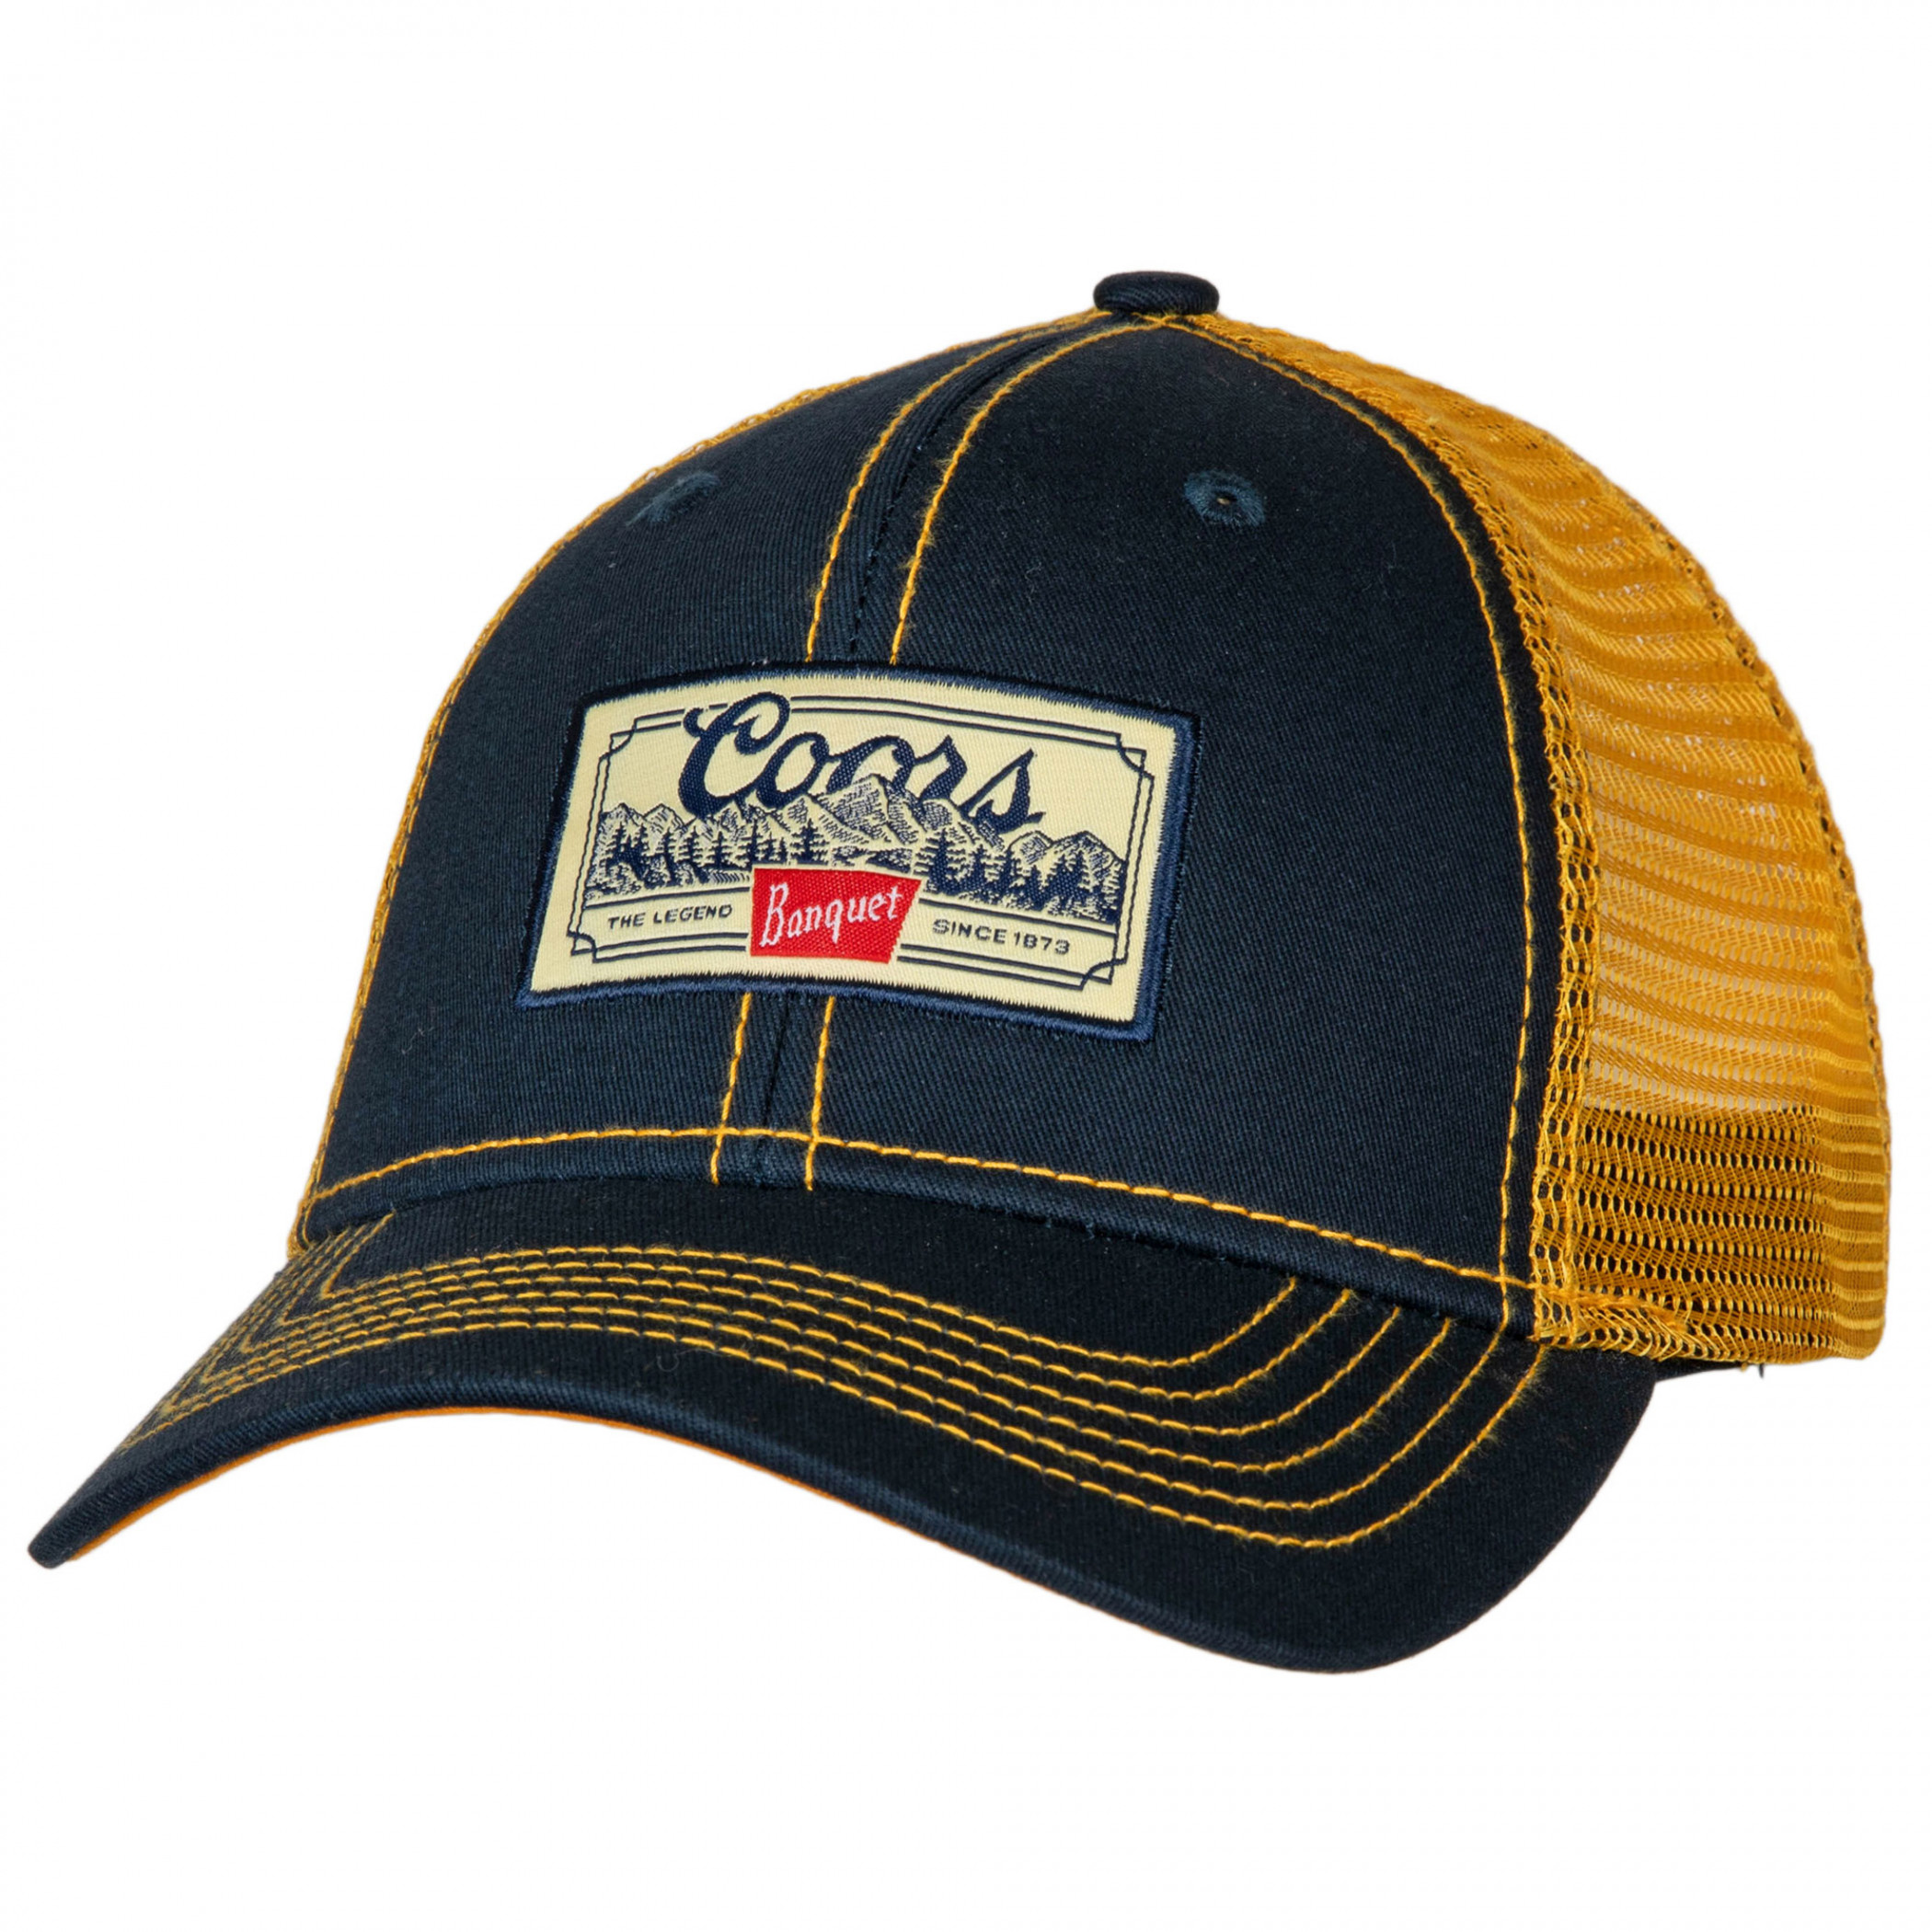 Coors Banquet Gold Cotton Twill Mesh Back Snapback Hat